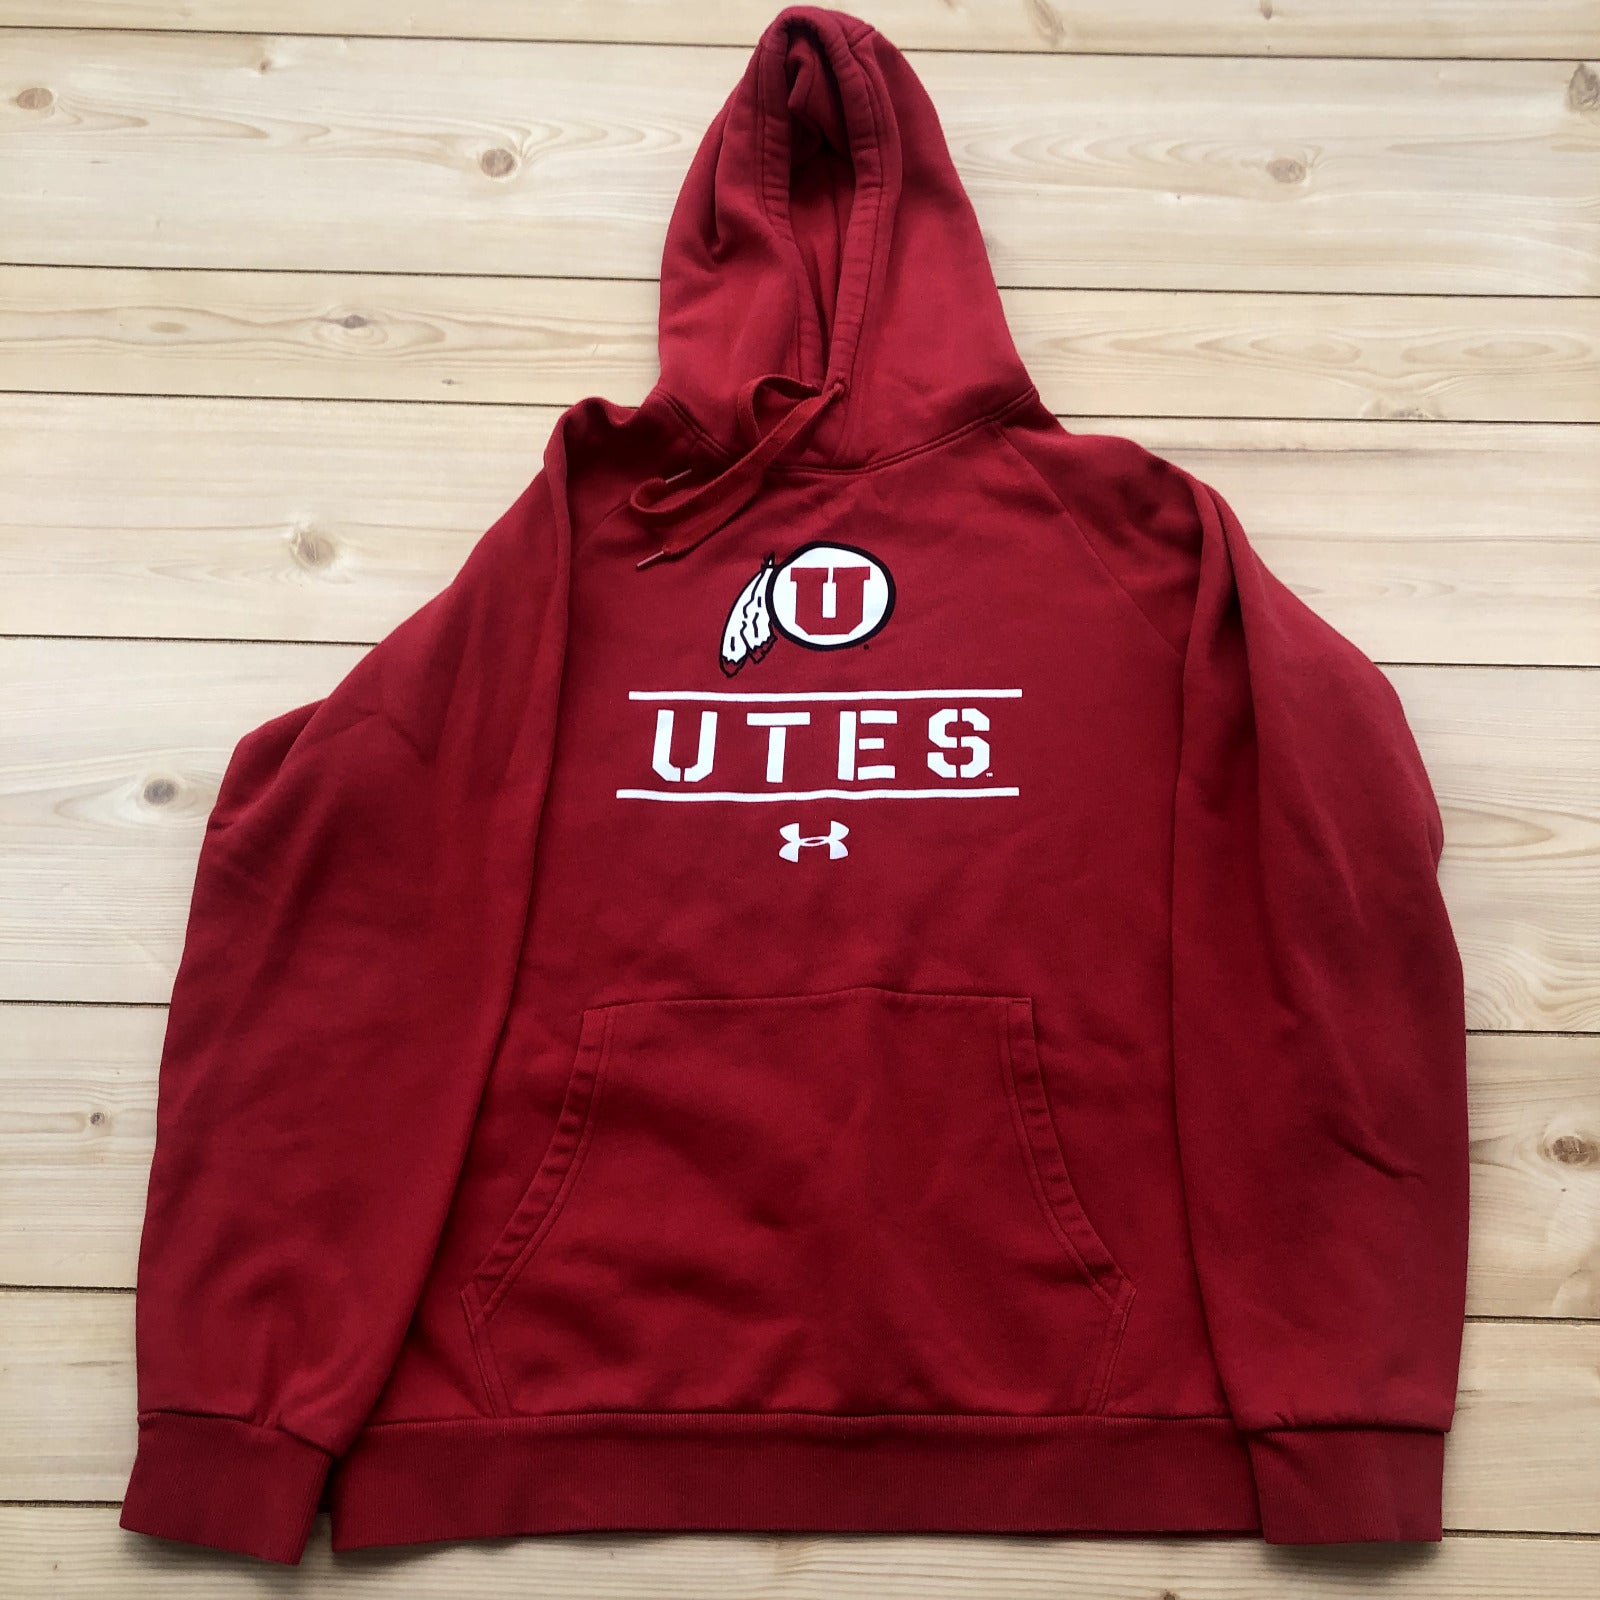 Under Armour Red NCAA Utah UTES Long Sleeve Pullover Hoodie Adult Size Large